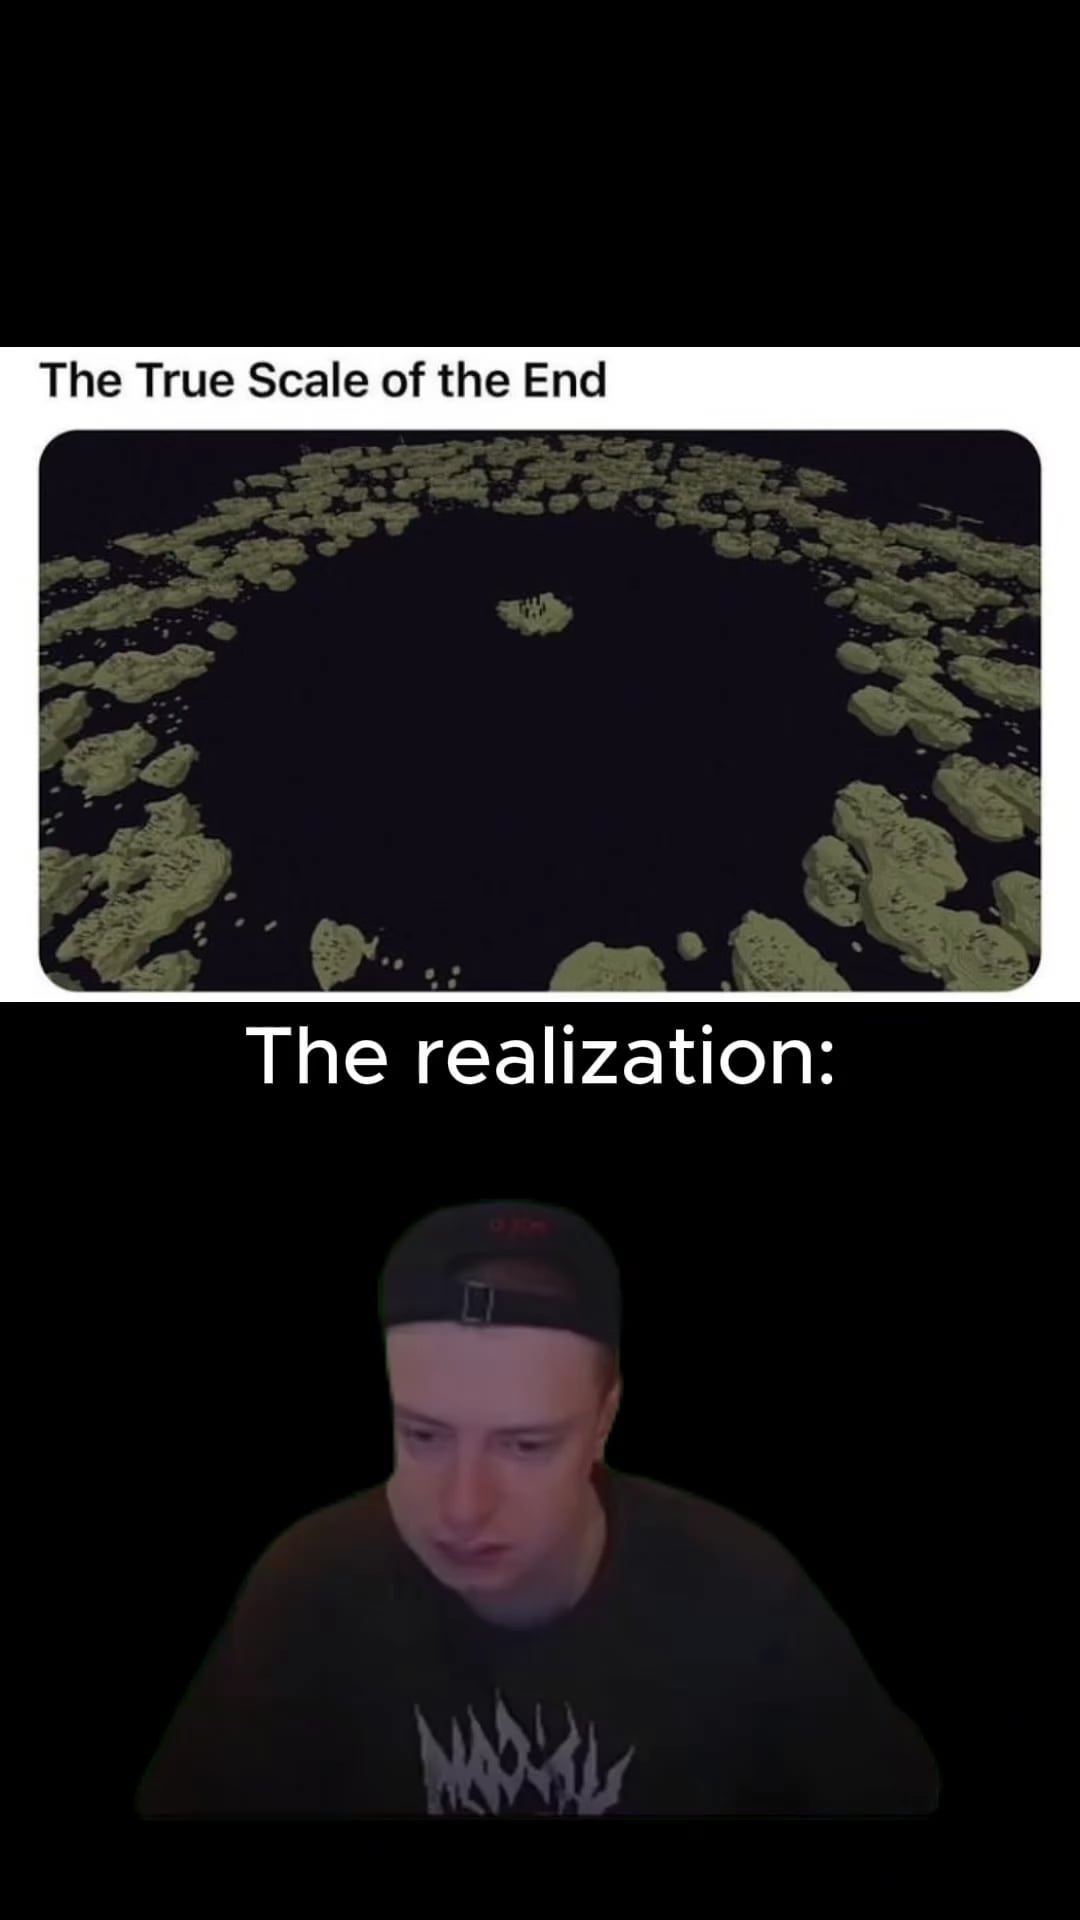 Minecraft Memes - The End: Beyond Our Wildest Imagination